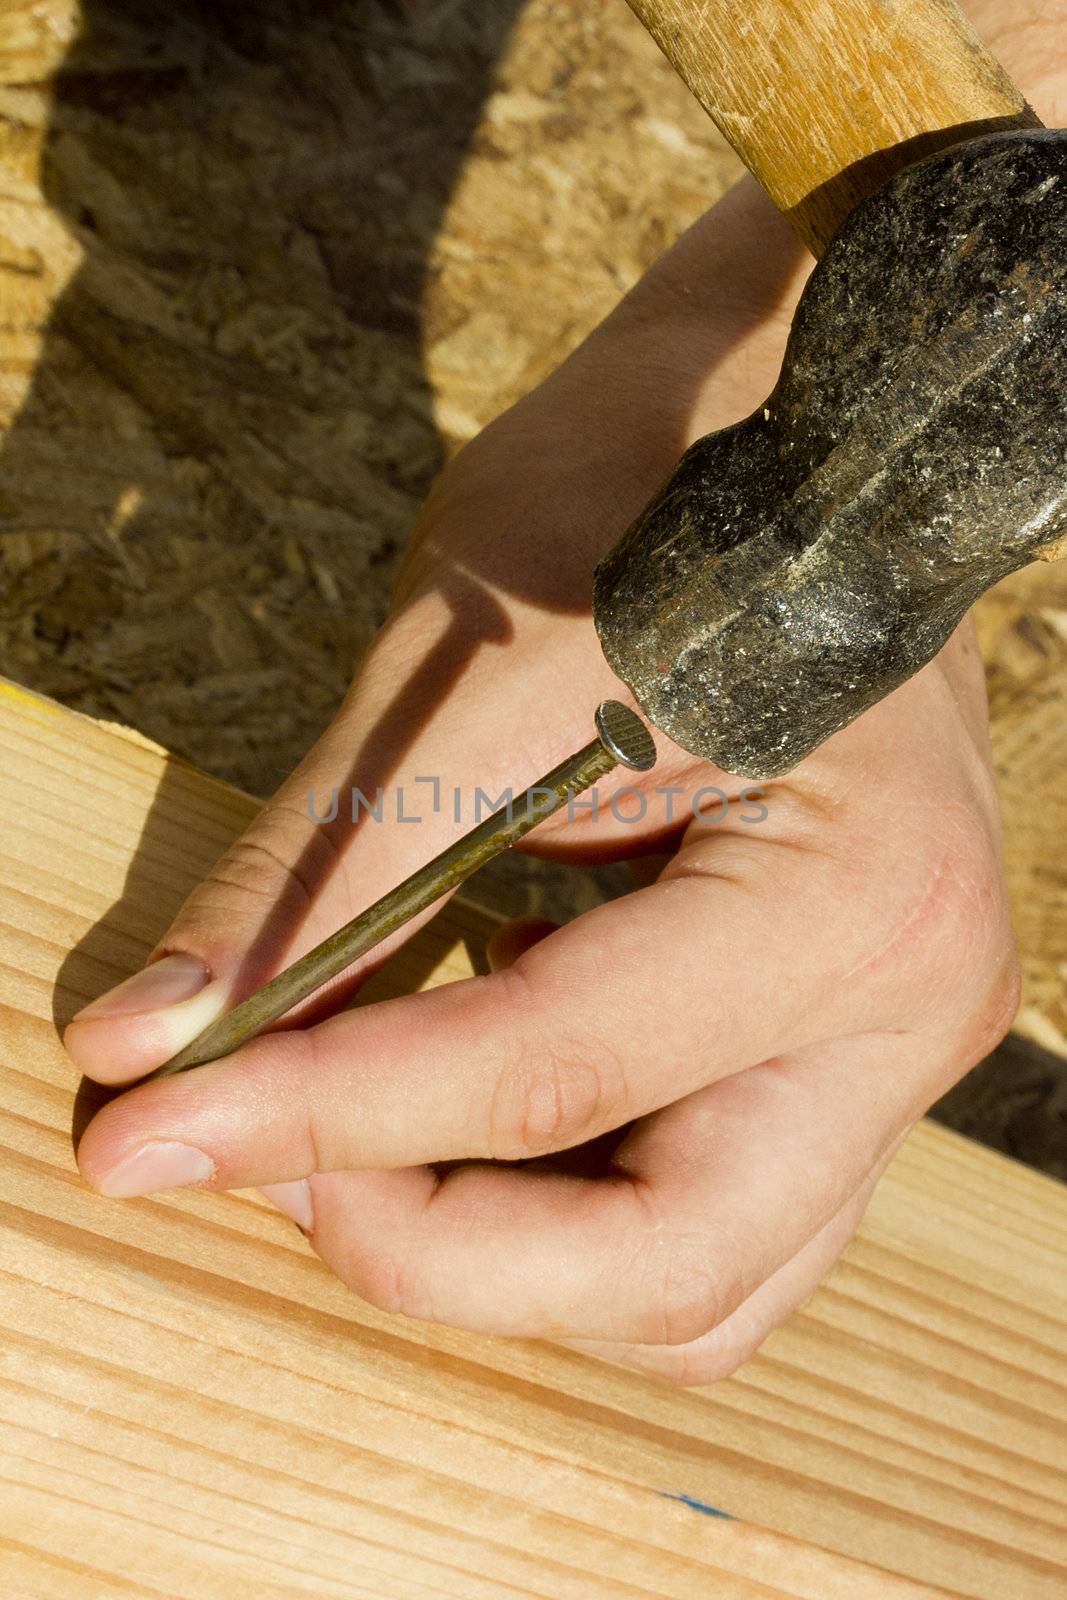 Construction worker hammering a nail into a piece of wood.